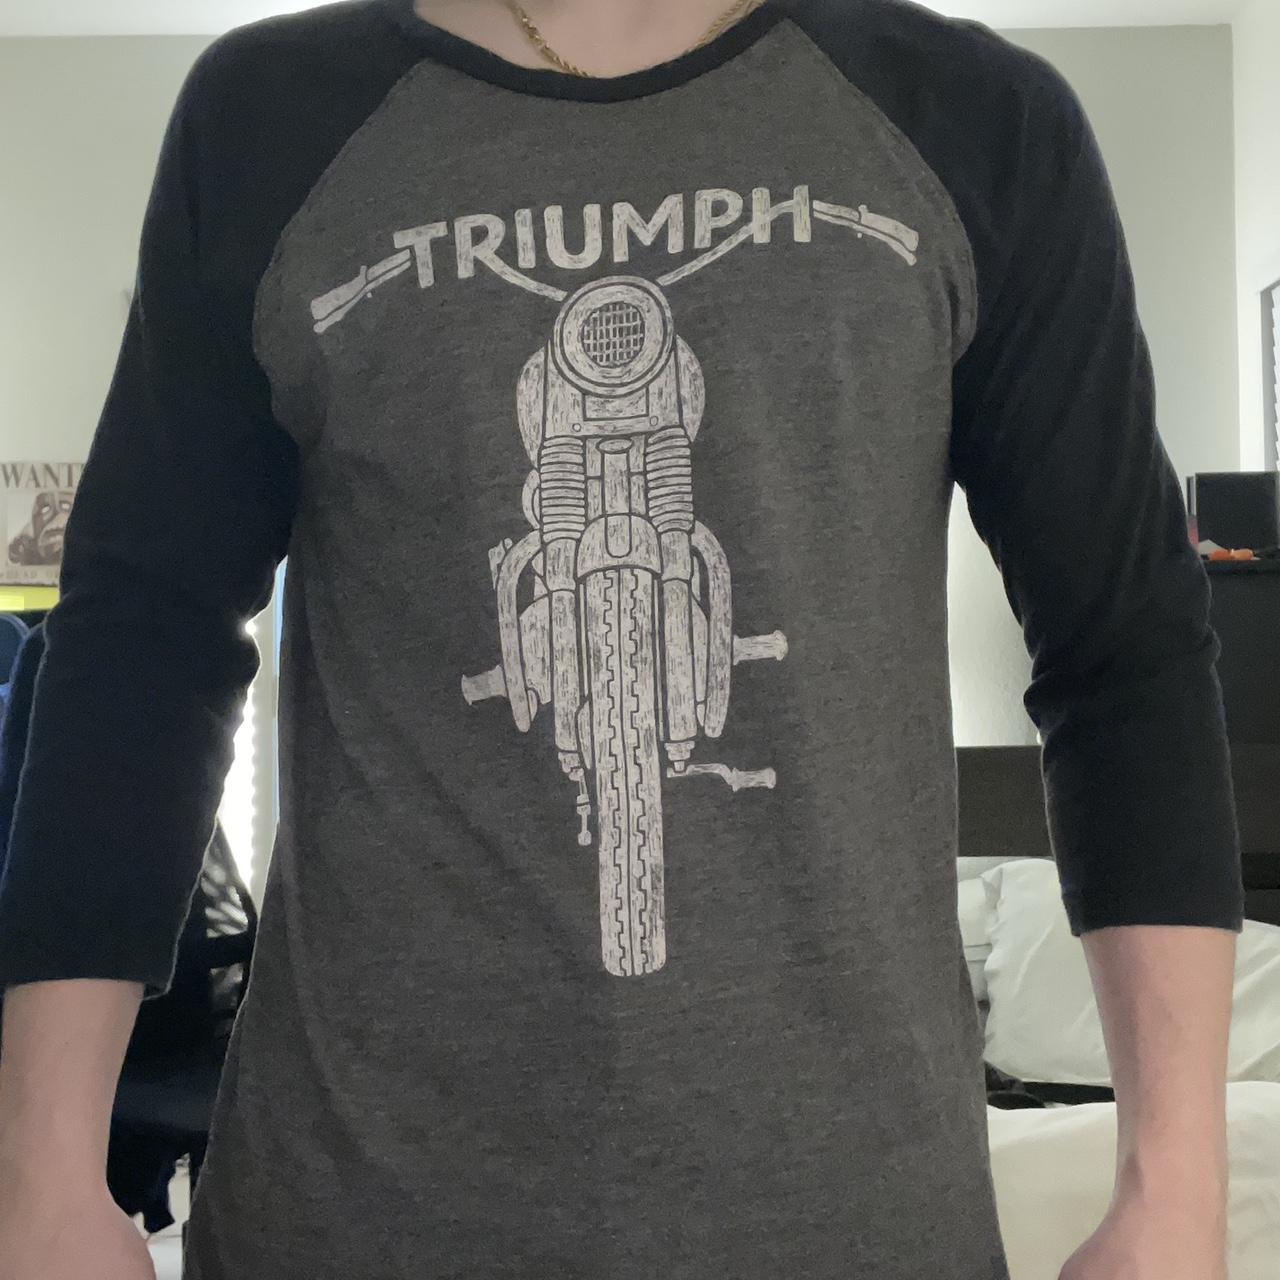  Triumph motorcycles x Lucky Brand tee, - Size